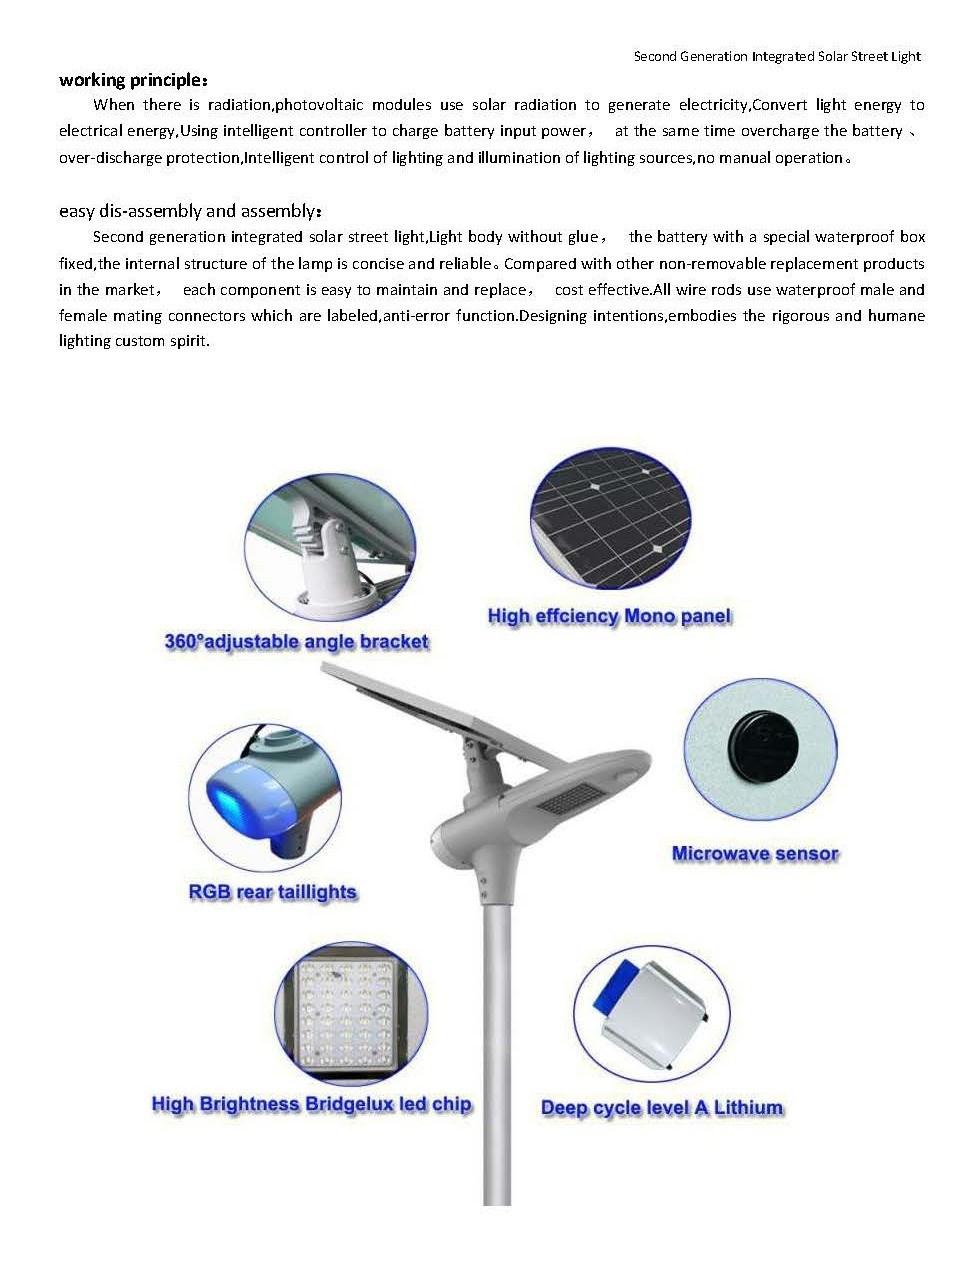 Rygh-8000lm 80W Shenzhen Manufacturer Aluminum Lithium Battery LED Solar Panel Street Lights Outdoor Warm White Cool White